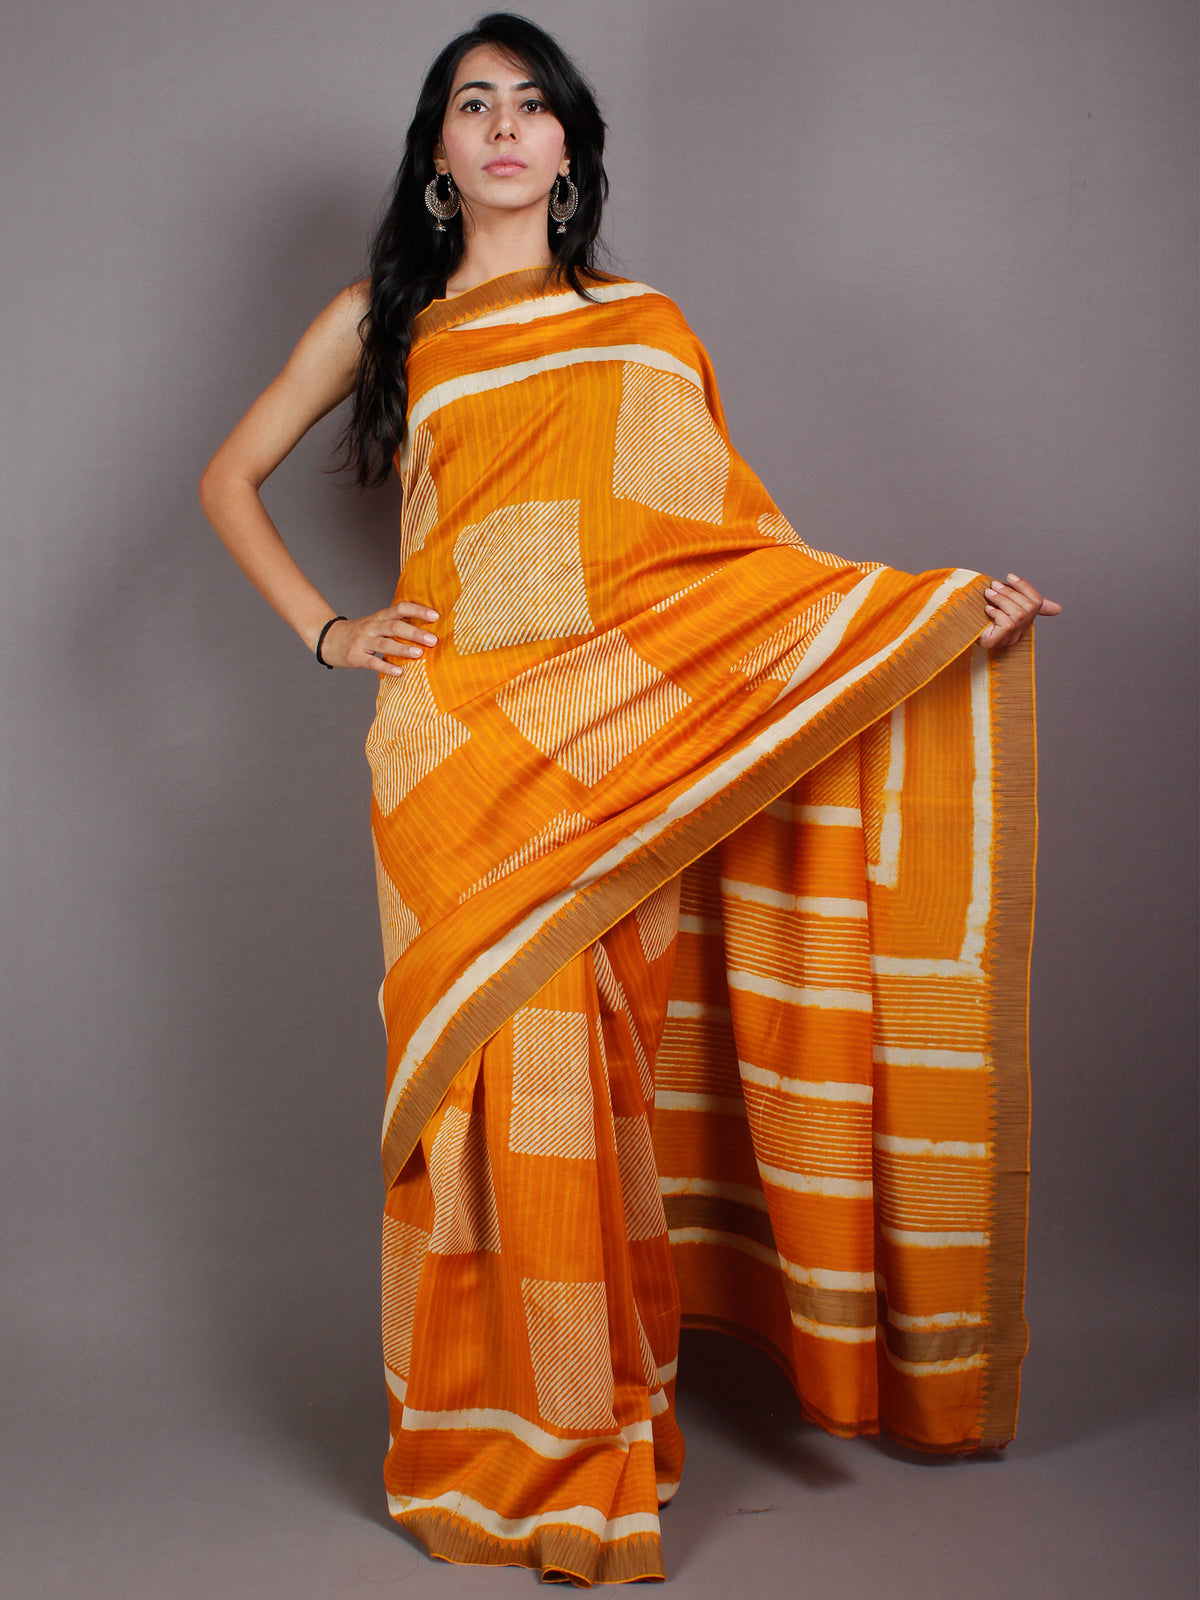 Yellow Beige White Hand Block Printed in Natural Vegetable Colors Chanderi Saree With Geecha Border - S03170513